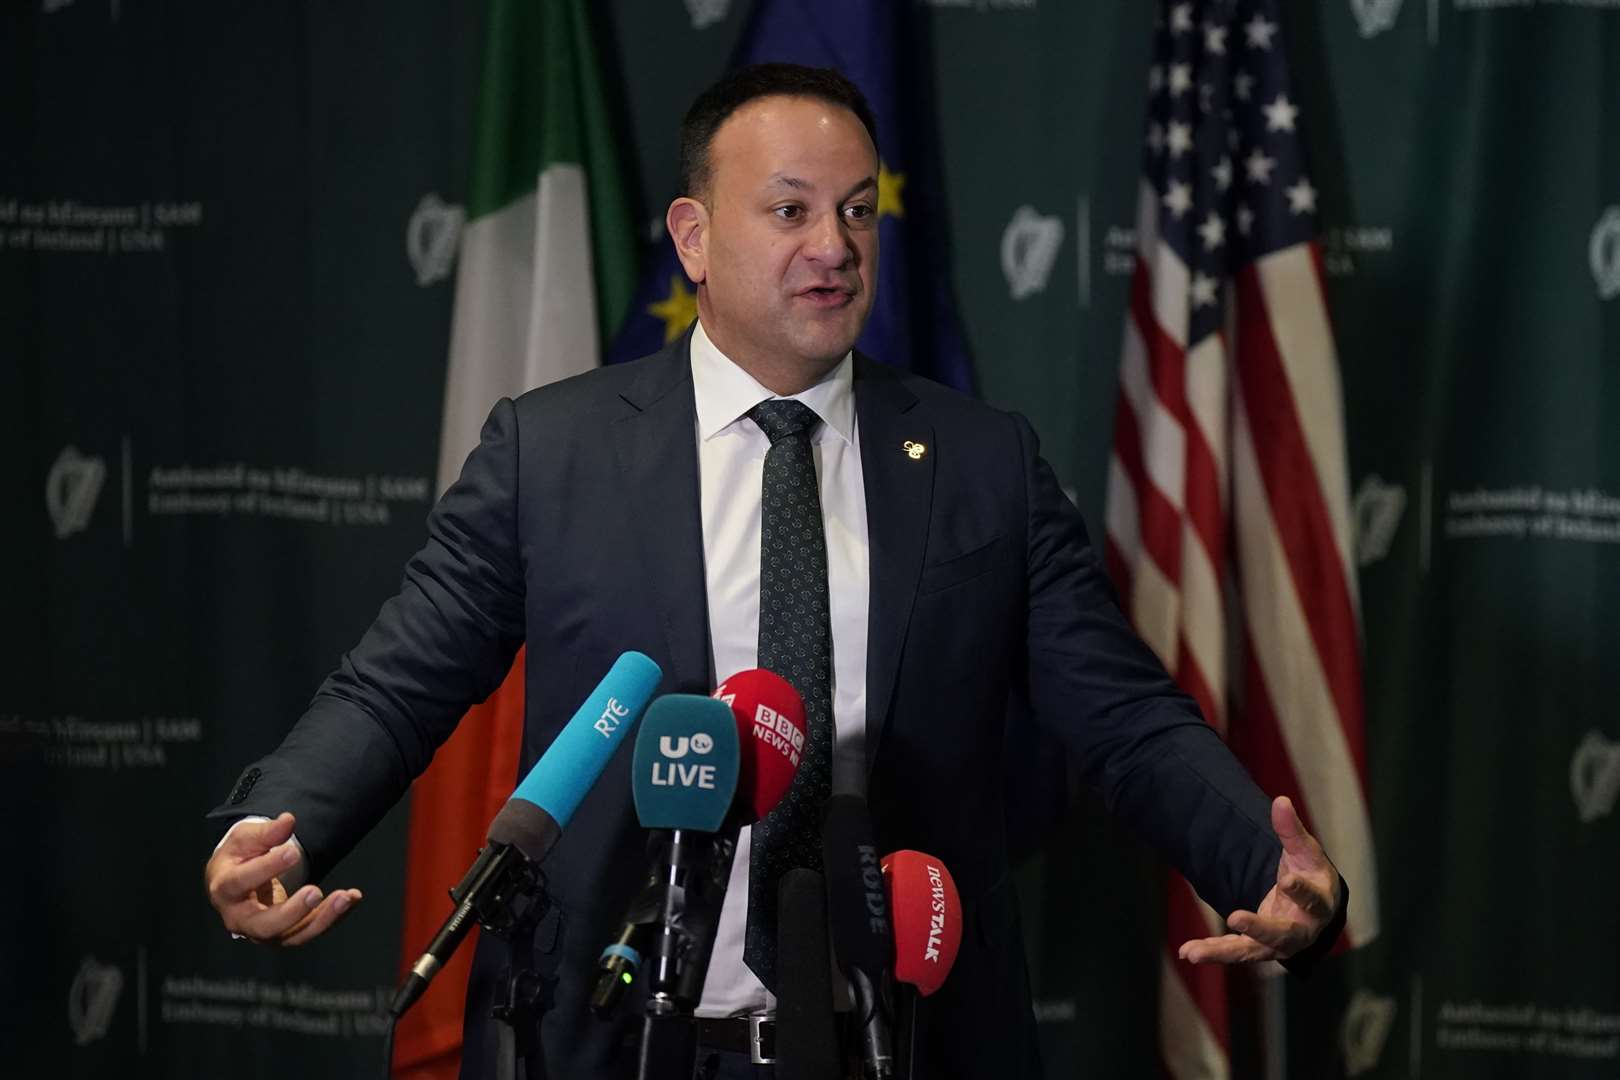 Taoiseach Leo Varadkar speaks to the media at the Dupont Circle Hotel, Washington, DC, during his visit to the US for St Patrick’s Day (Niall Carson/PA)